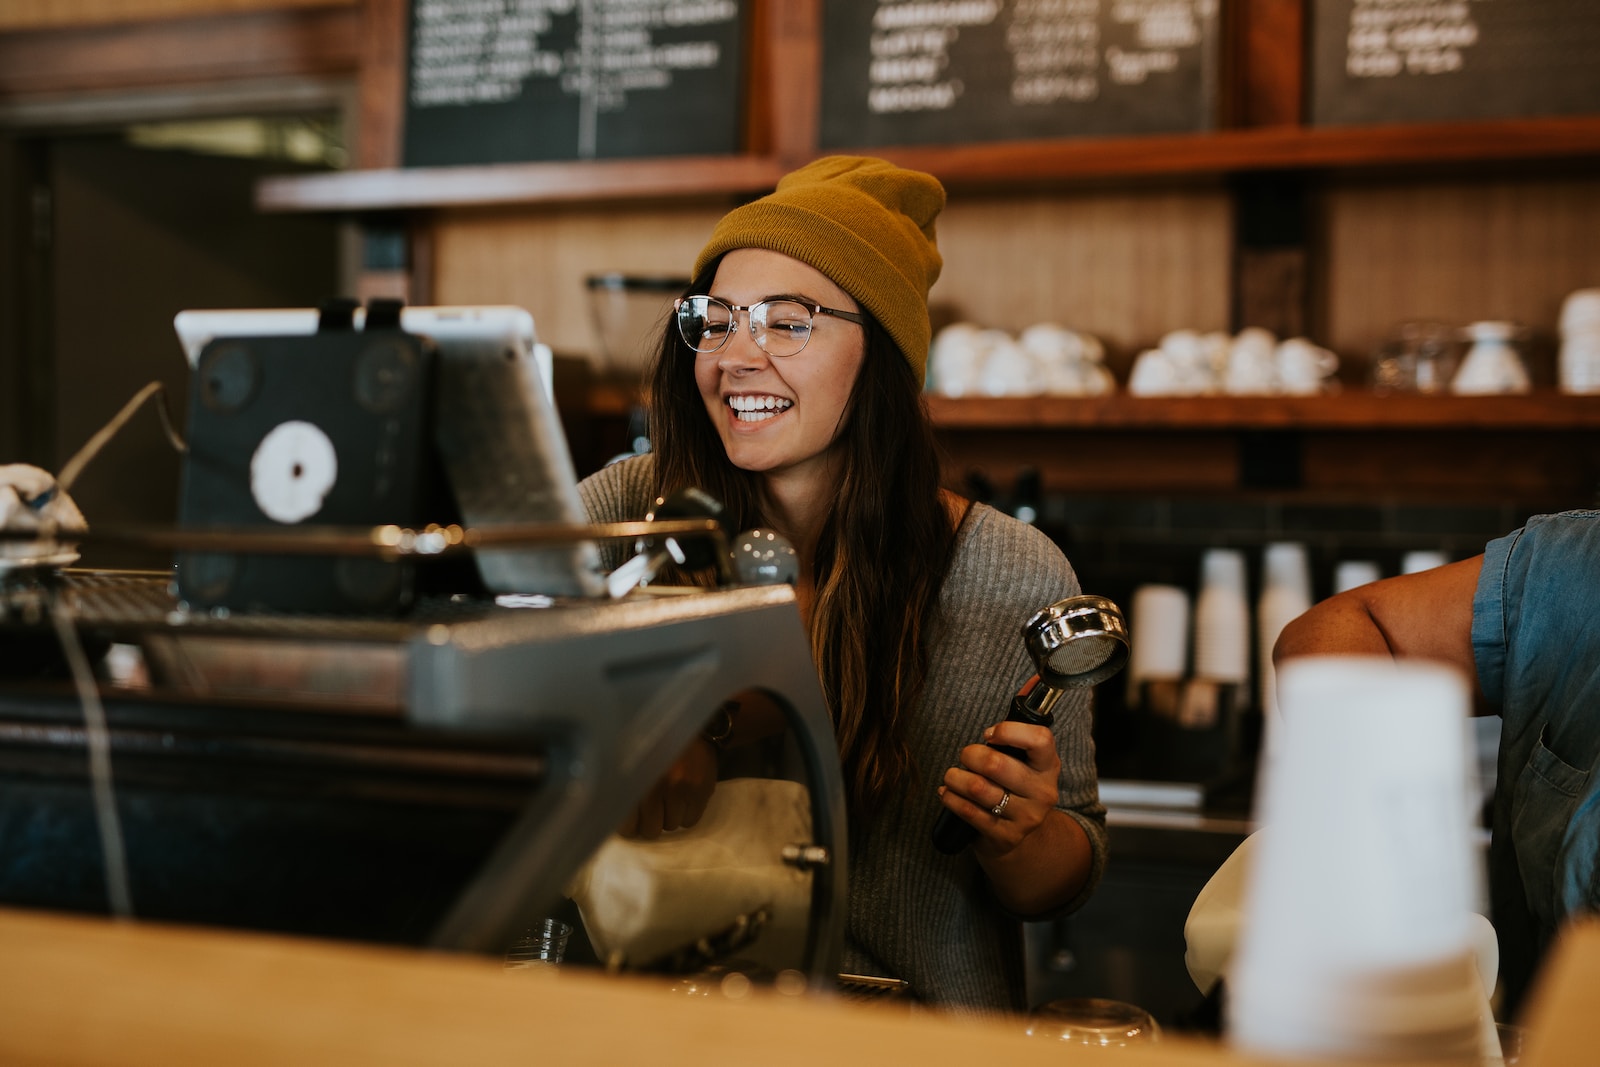 Barista FIRE: Brewing Financial Independence with a Side of Fulfillment